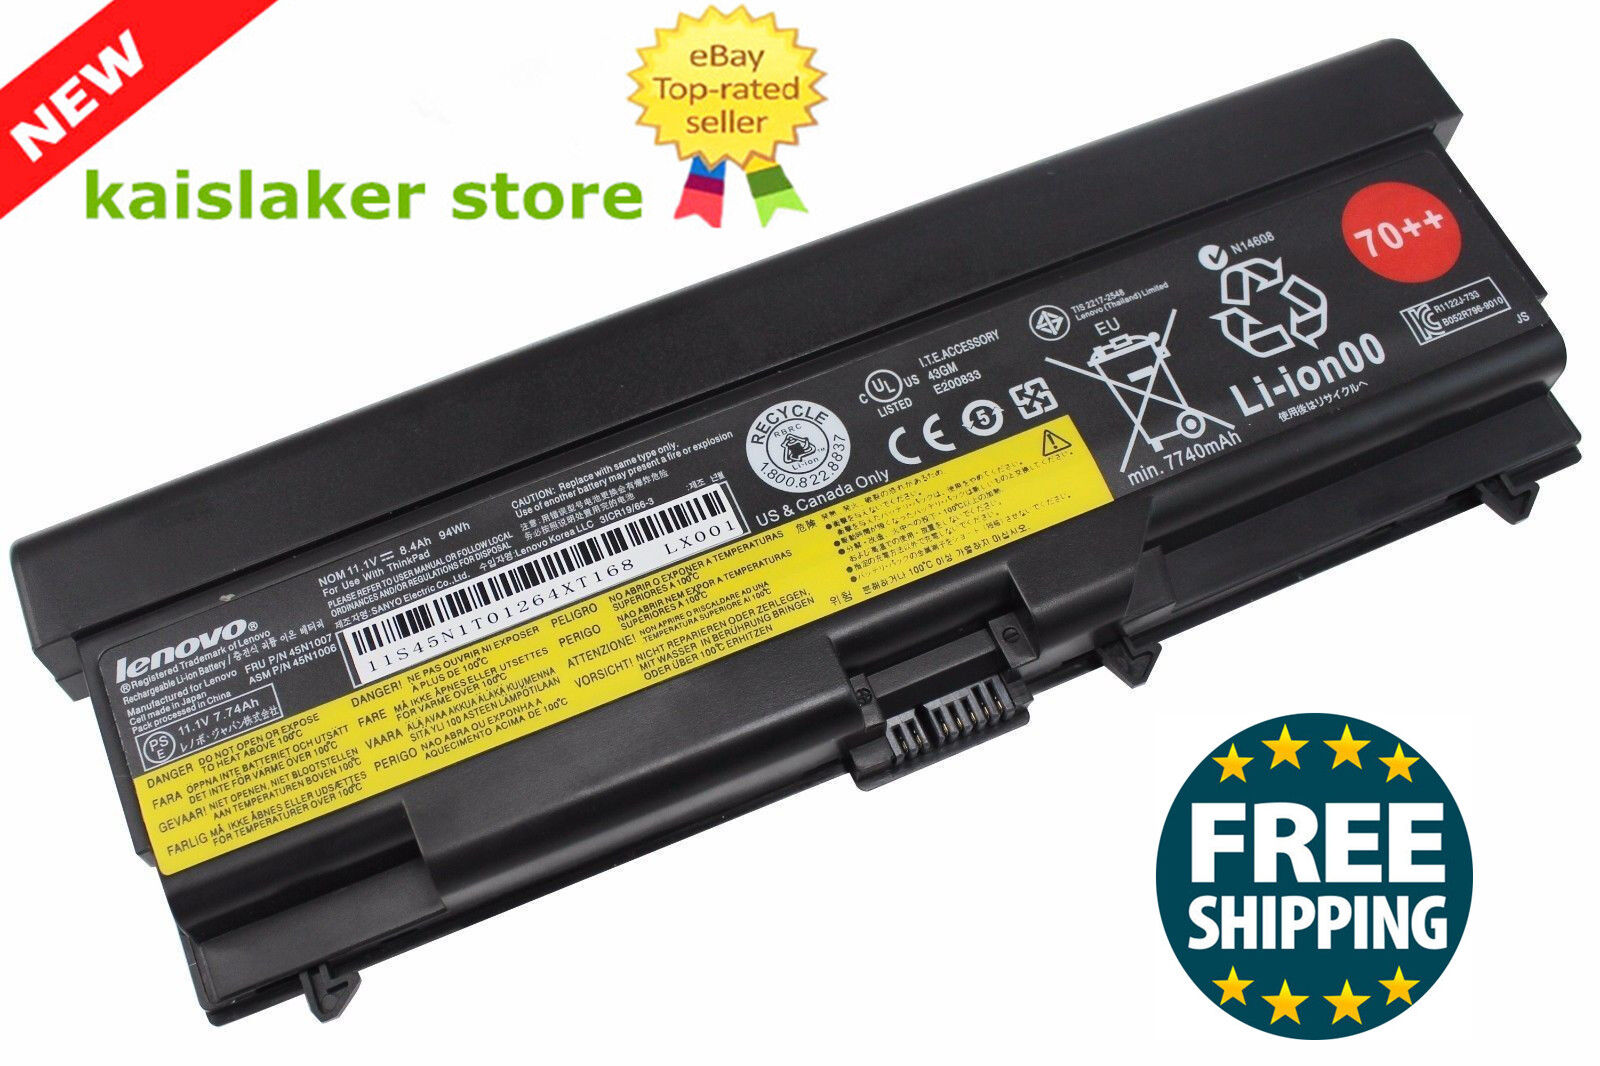 Genuine 9Cell 0A36303 Battery For Len ovo ThinkPad T430 T530 W530 L430 L530 70++